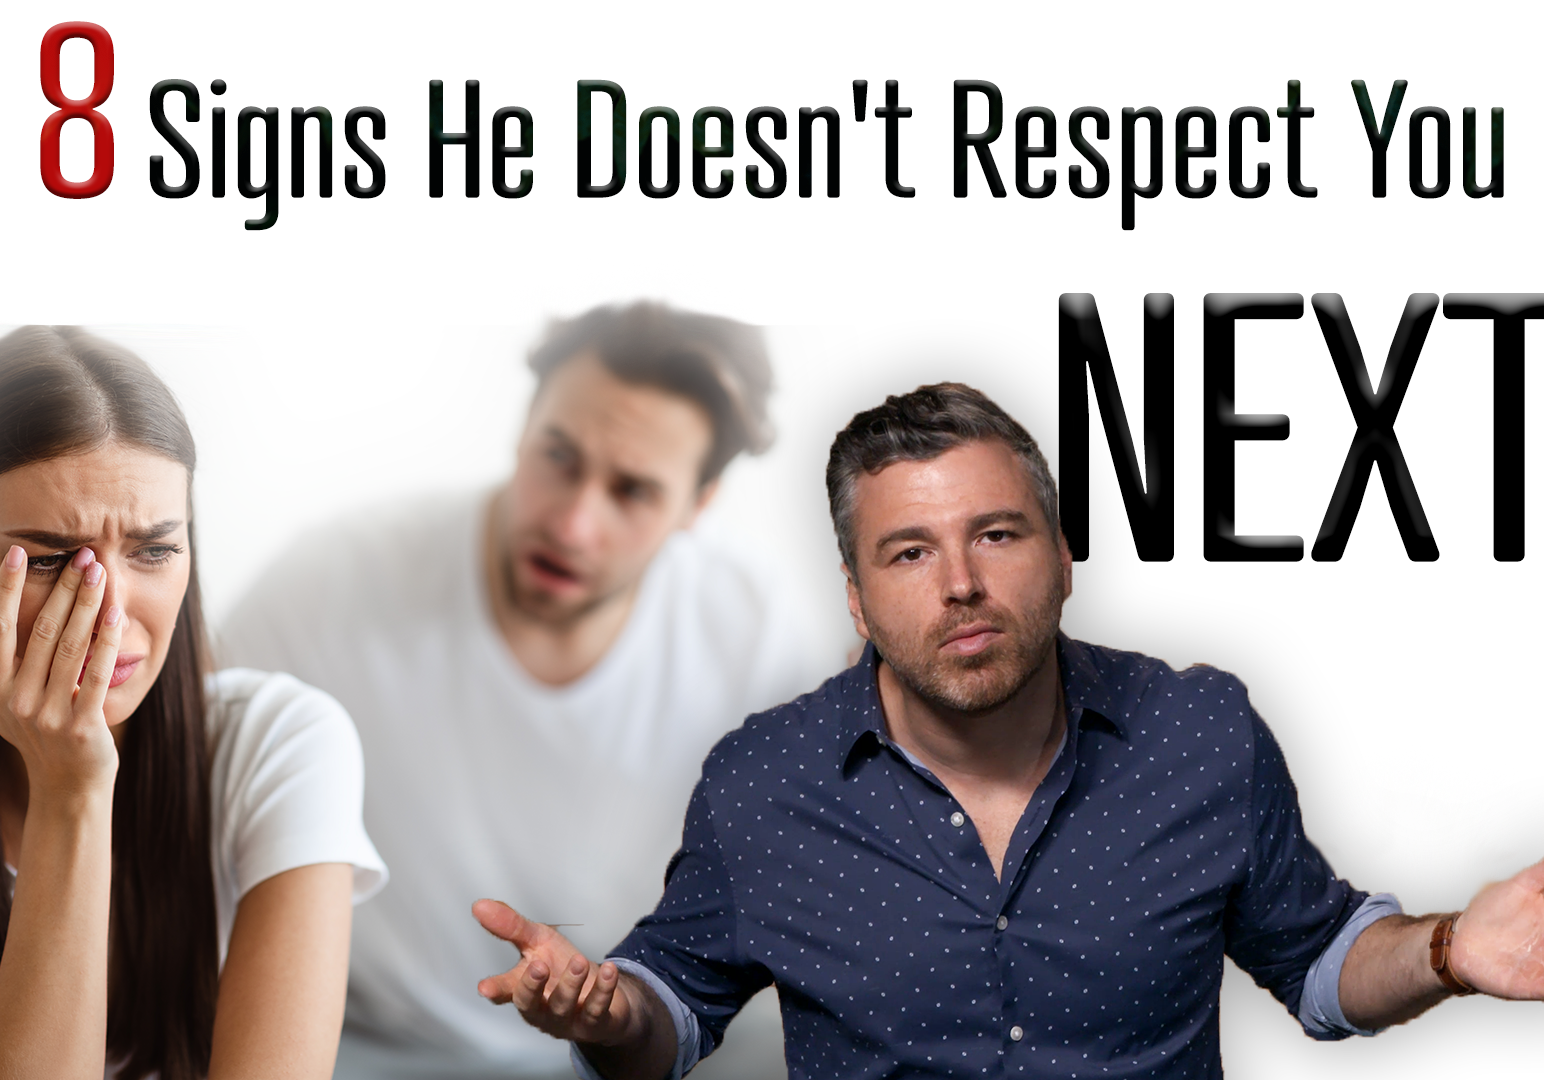 8 signs he doesn't respect you - NEXT! THUMB